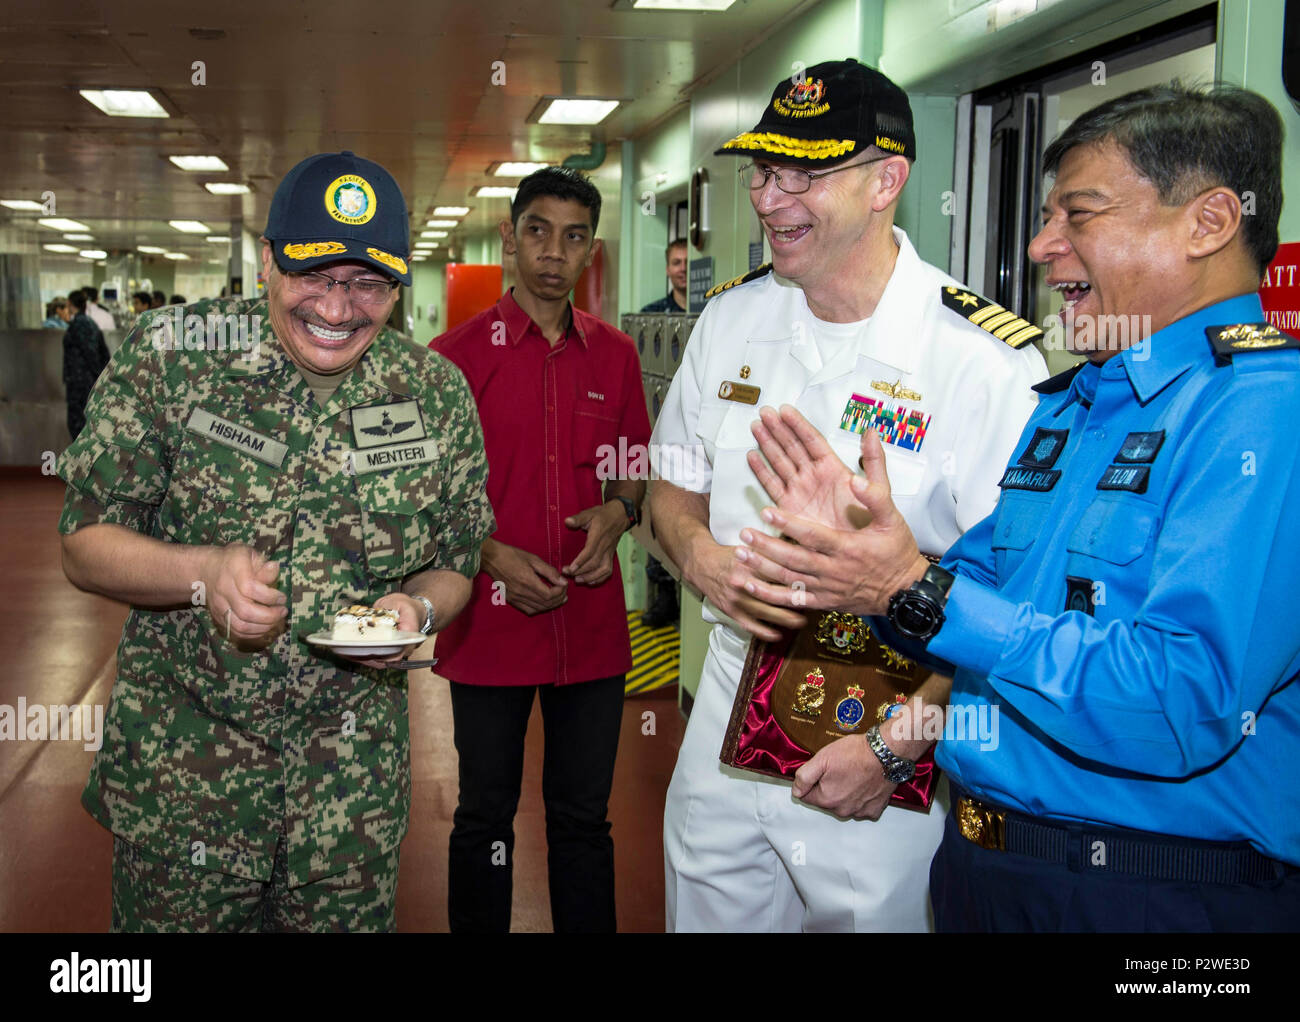 160804-N-QW941-382 KUANTAN, Malaysia (Aug 4, 2016) Dato’ Seri Hishammuddin Tun Hussein (left), Minister of Defense, Malaysia, is given a cake in celebration of his birthday while aboard hospital ship USNS Mercy (T-AH 19). While aboard Mercy, Hishammuddin met with Pacific Partnership personnel, toured the ship and participated in a press conference. This is the first time Mercy and Pacific Partnership have visited Malaysia. During the mission stop partner nations work side-by-side with local military and civilian organizations in a search and rescue exercise, civil engineering projects, communi Stock Photo